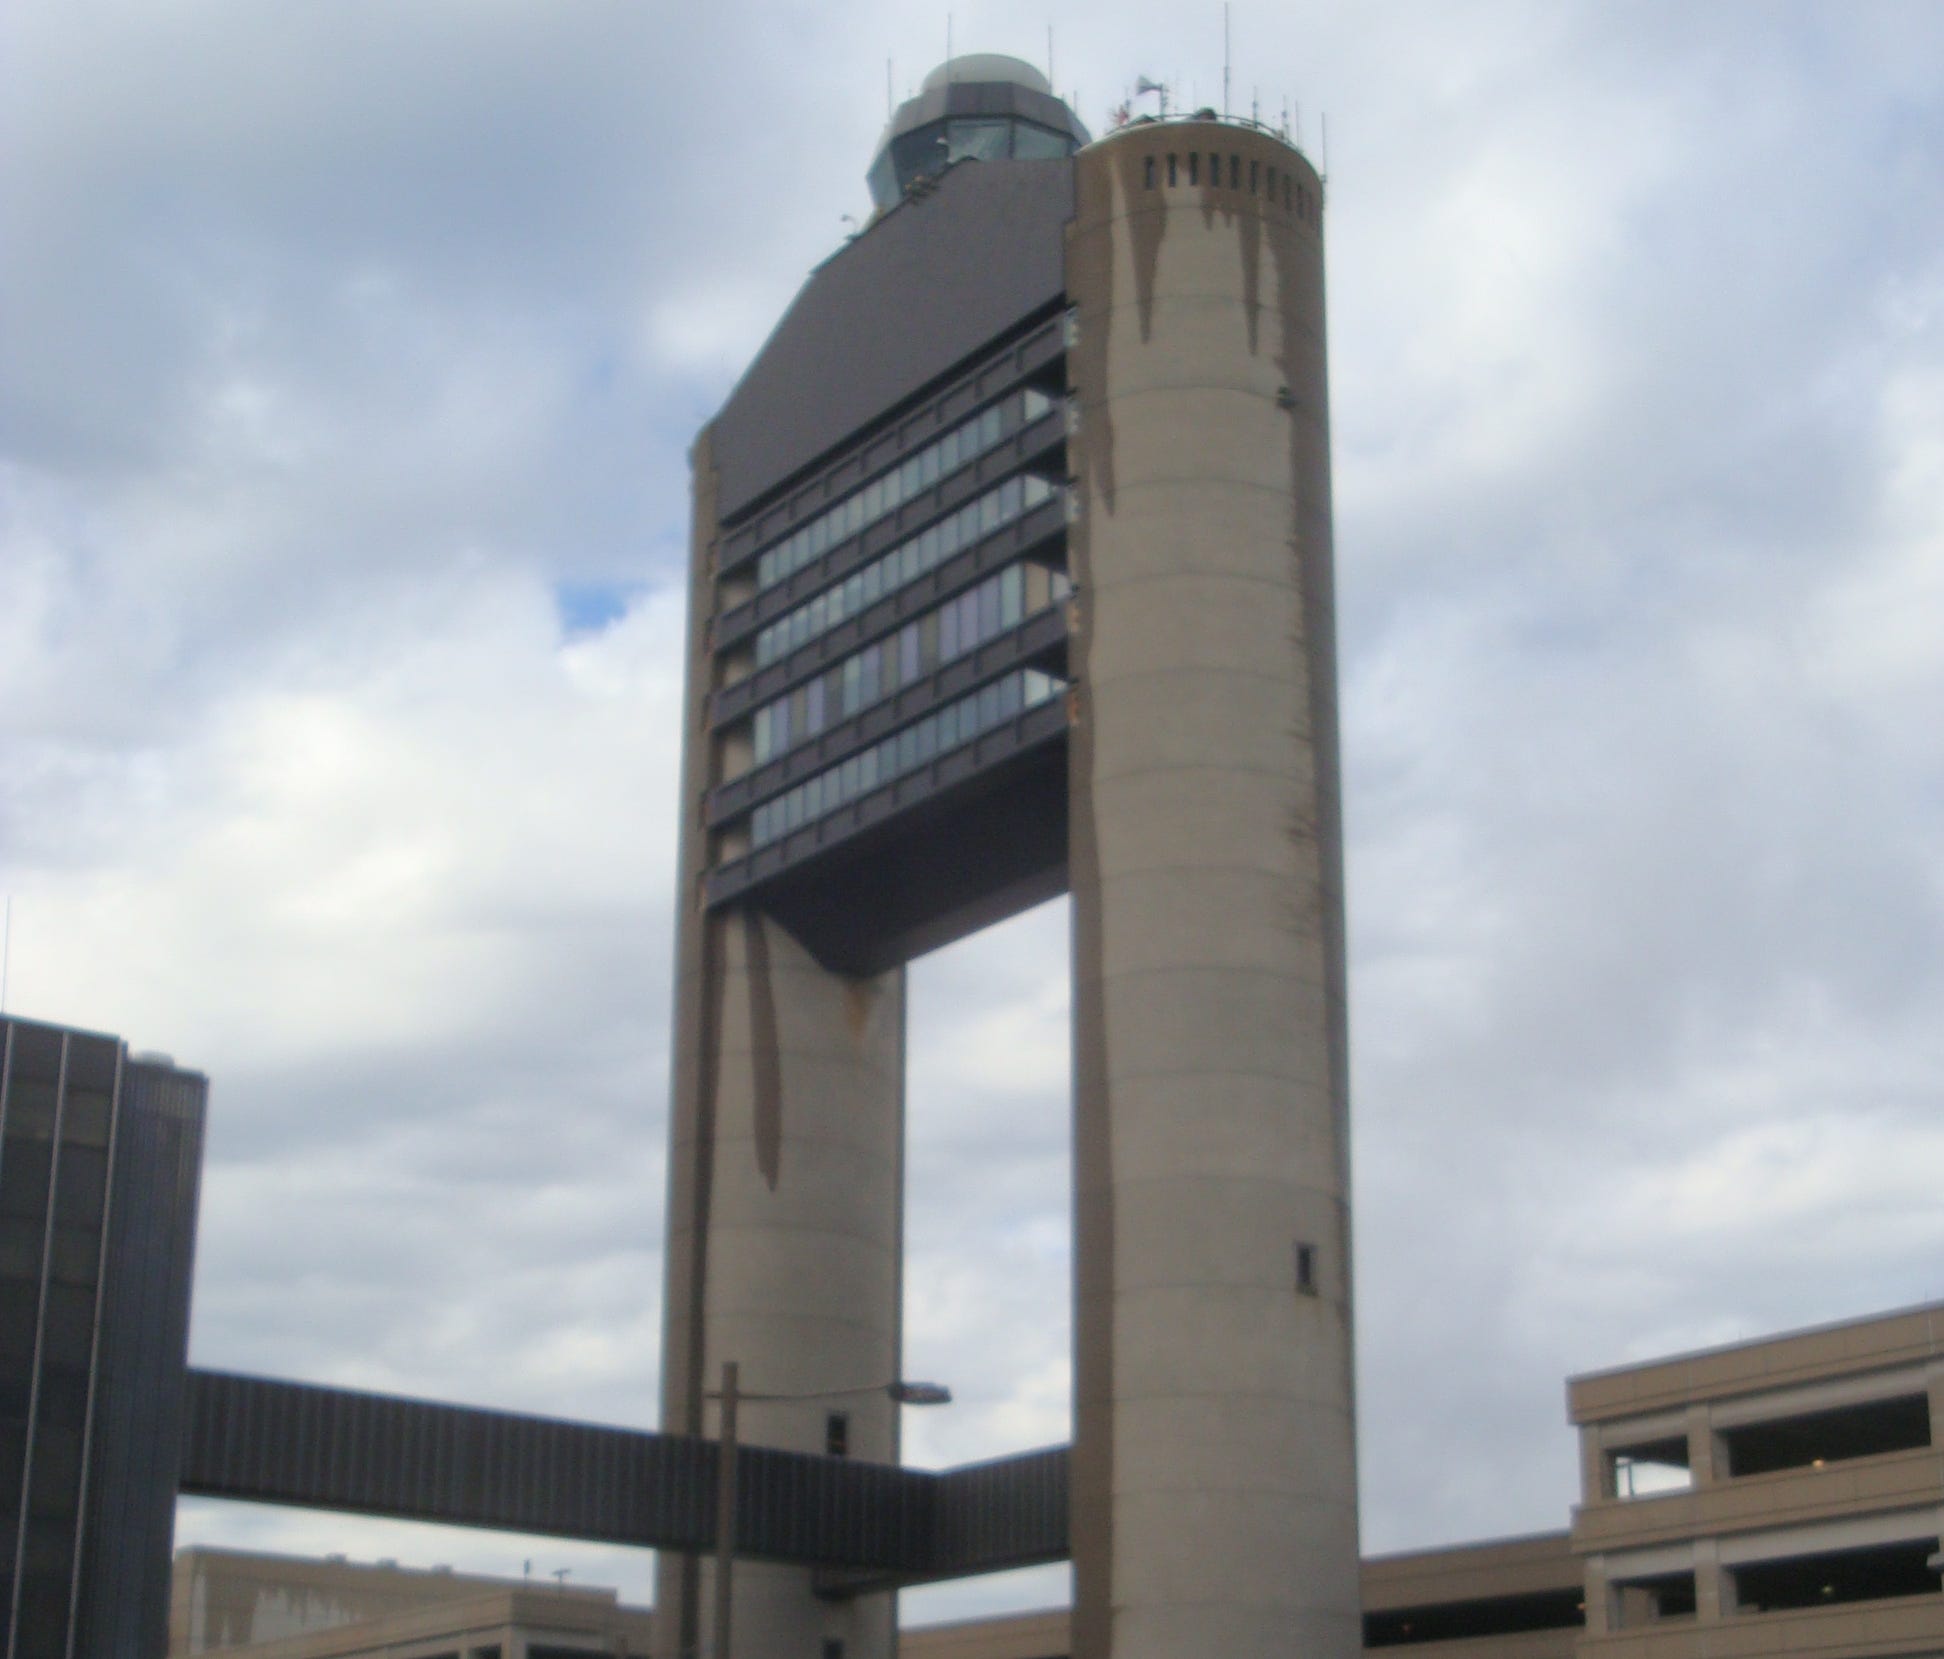 The control tower at Boston Logan International Airport on Oct. 10, 2009.